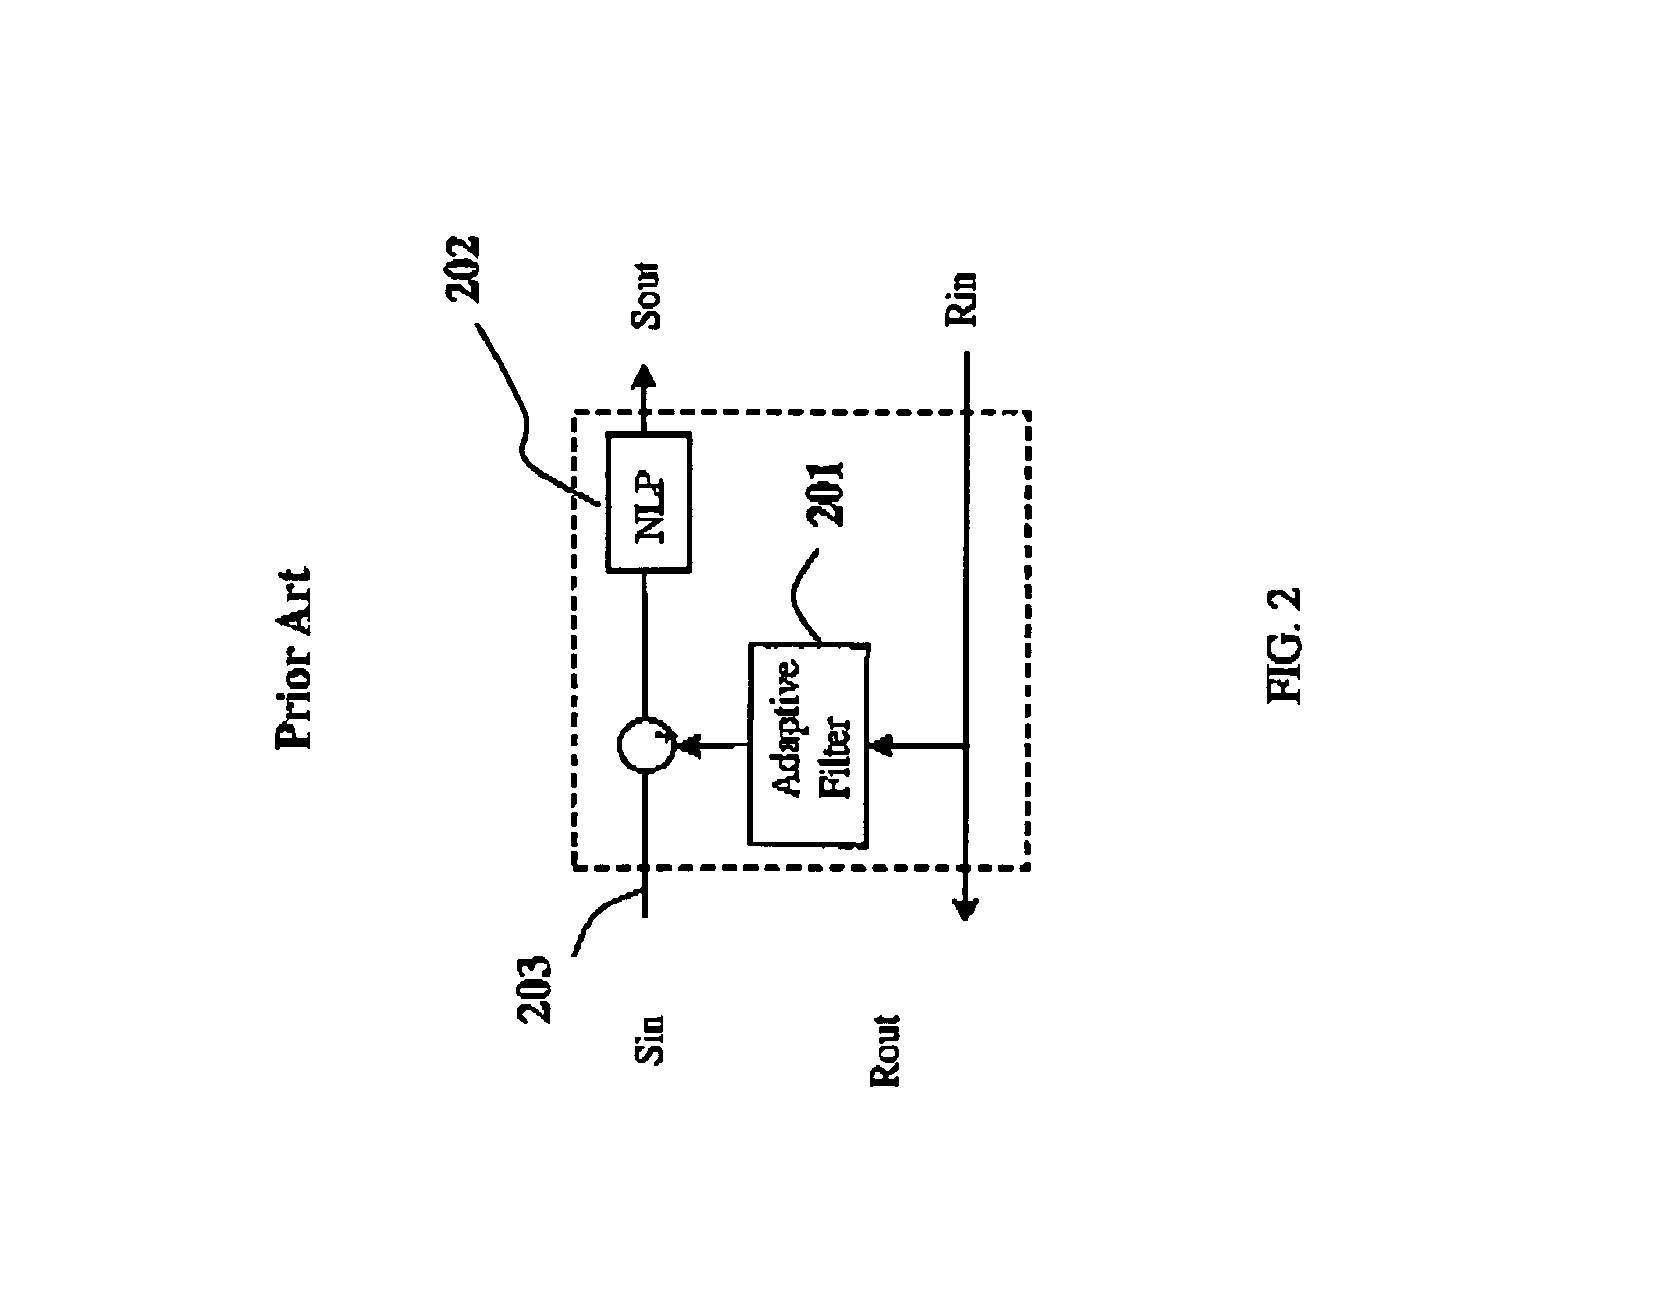 Methods and apparatus for echo cancellation using an adaptive lattice based non-linear processor